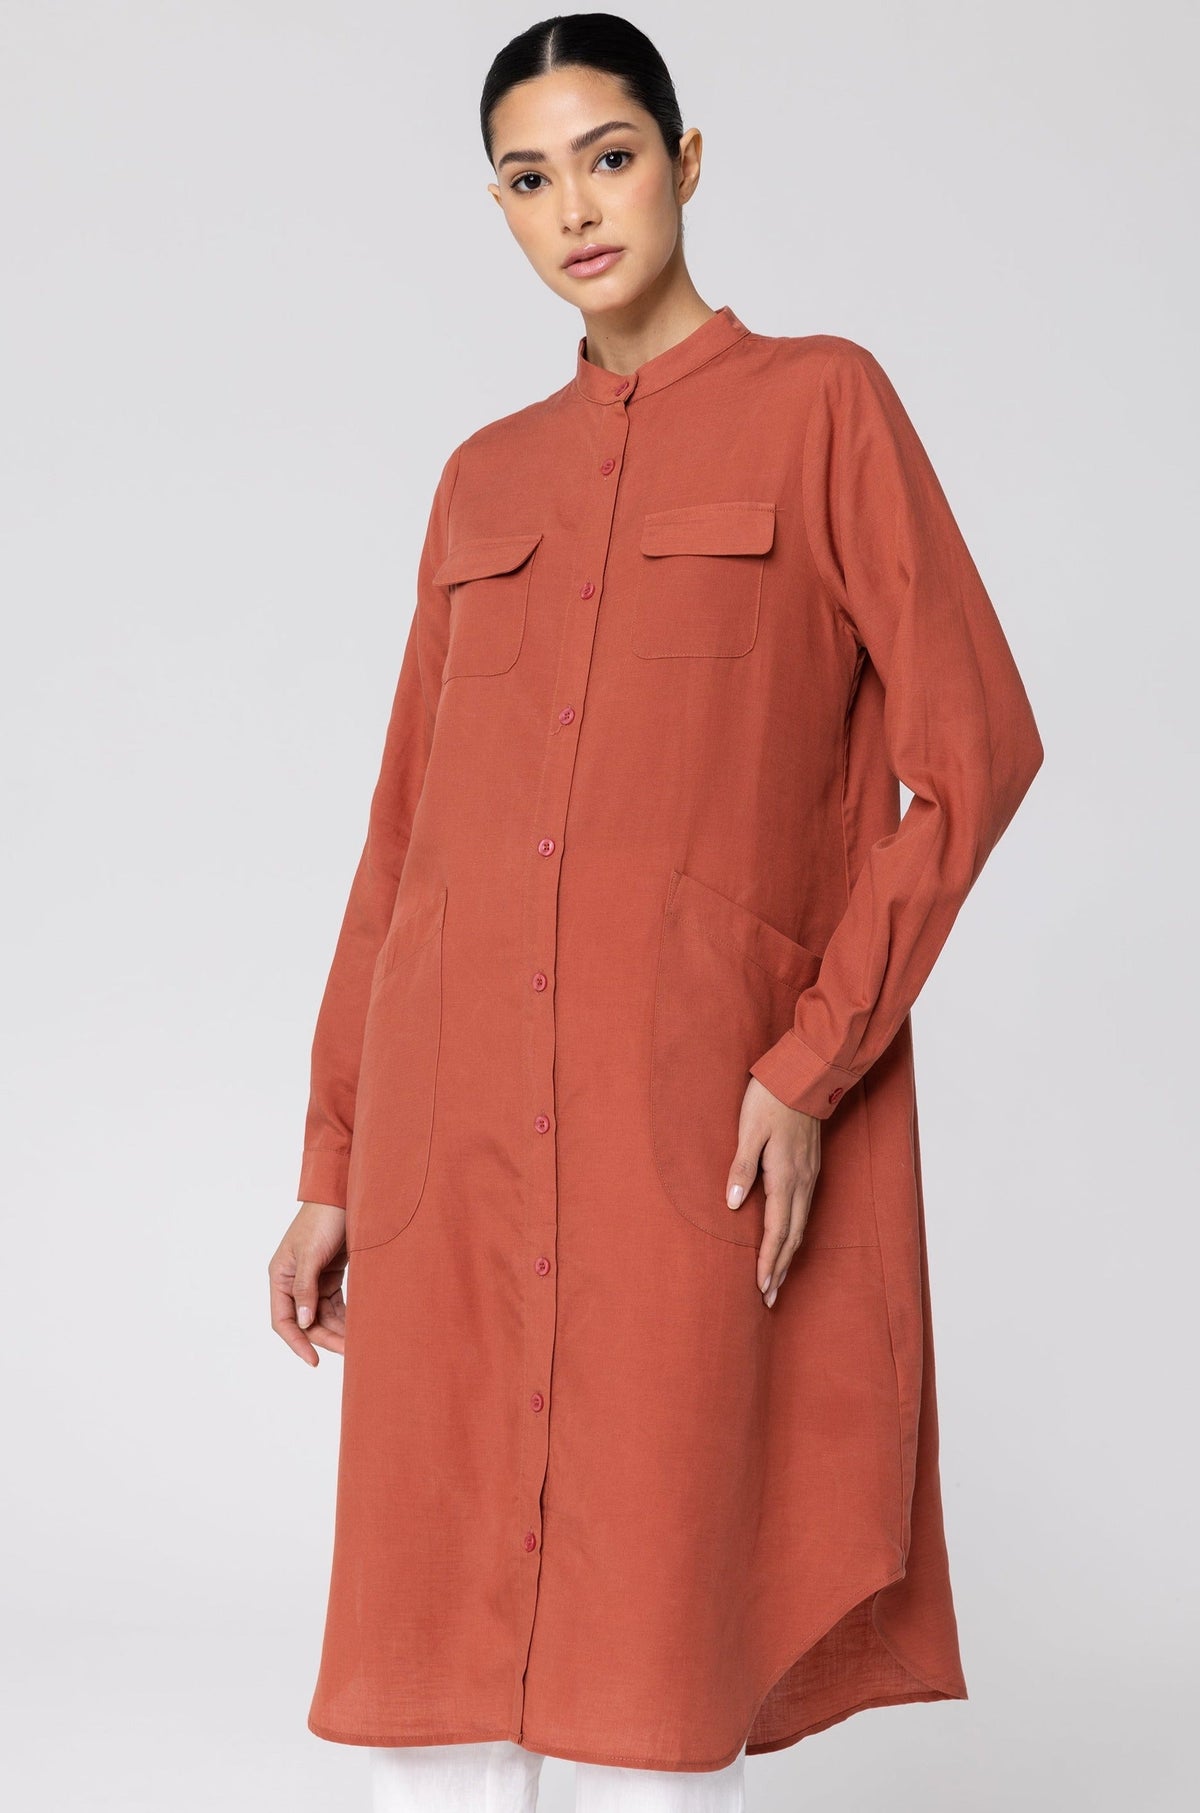 Nadine Button Down Utility Tunic - Baked Clay epschoolboard 